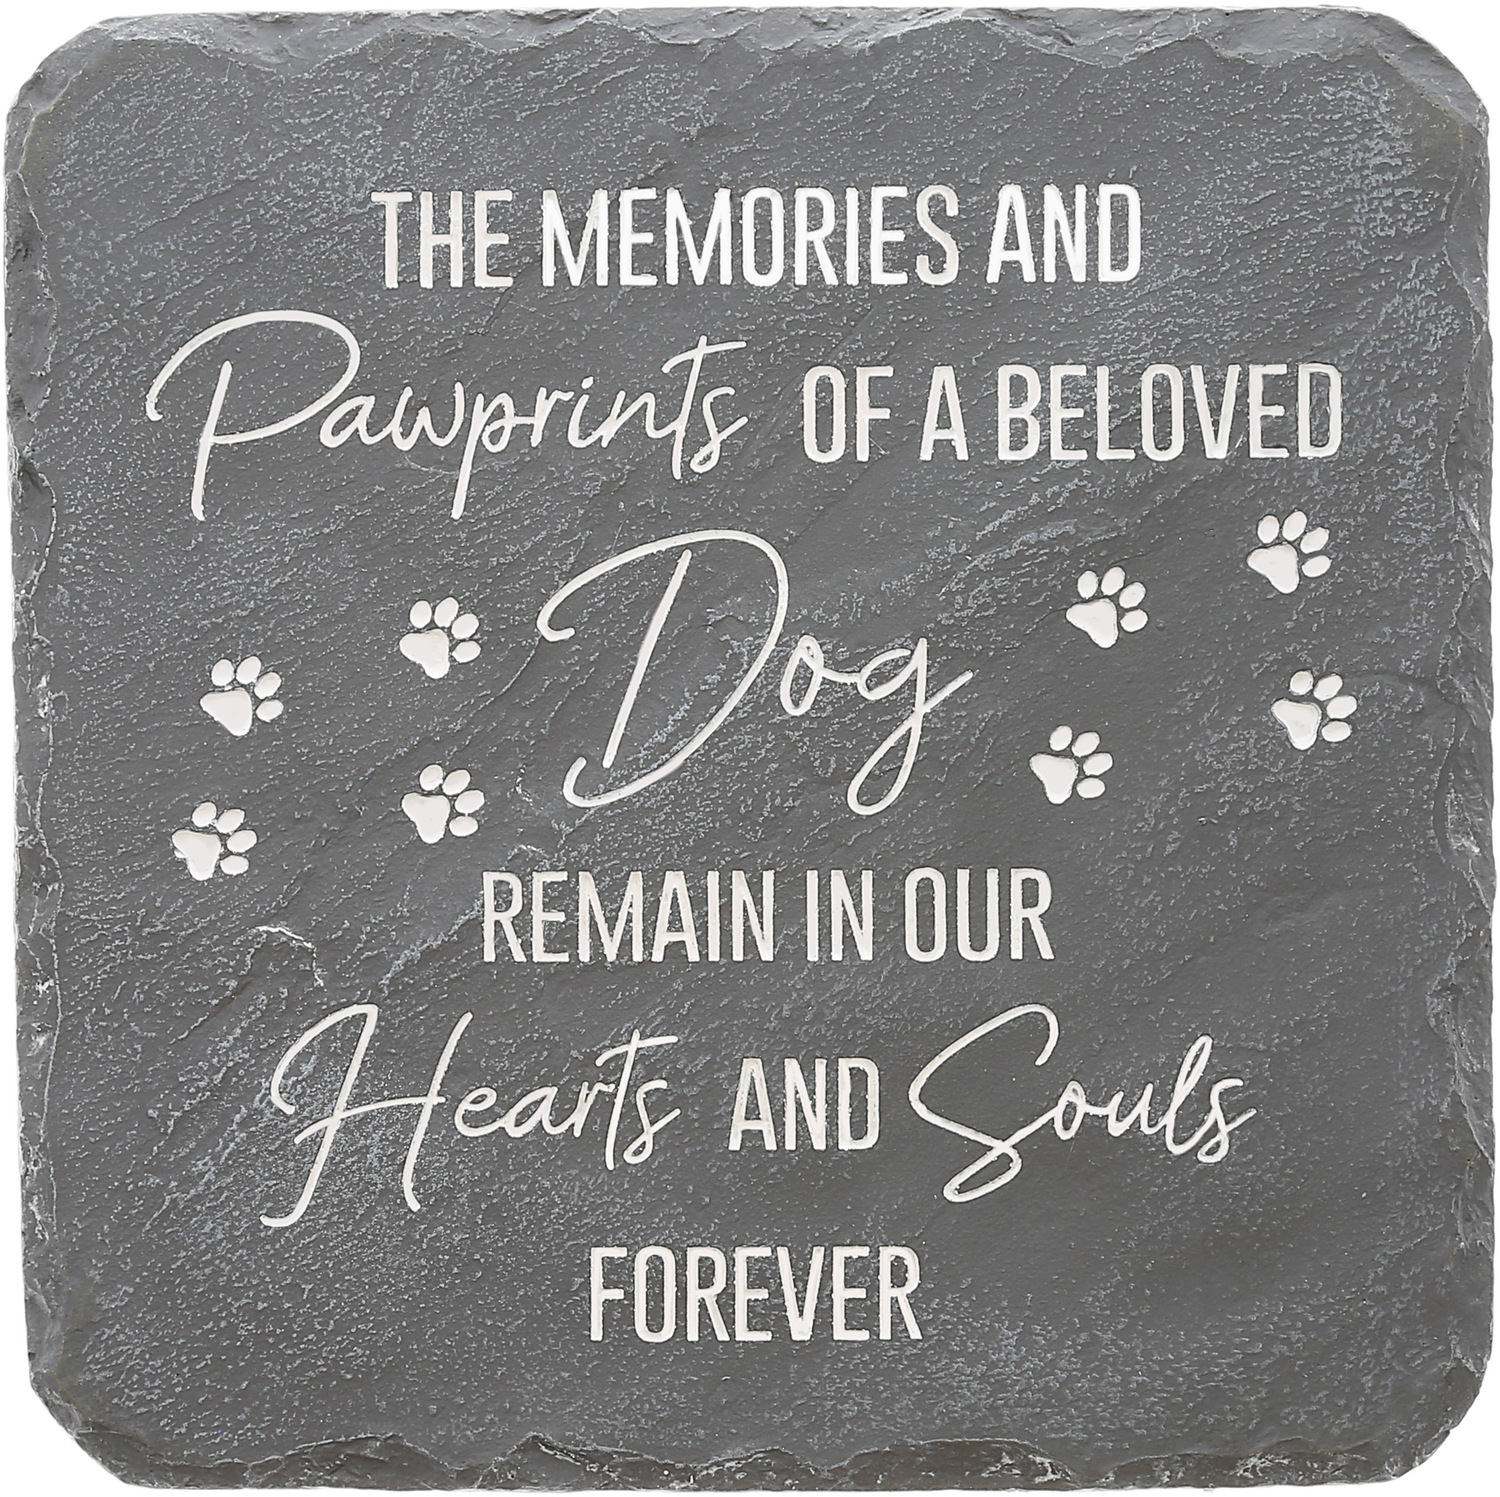 Dog Memorial by Stones with Stories - Dog Memorial - 7.75" x 7.75" Garden Stone